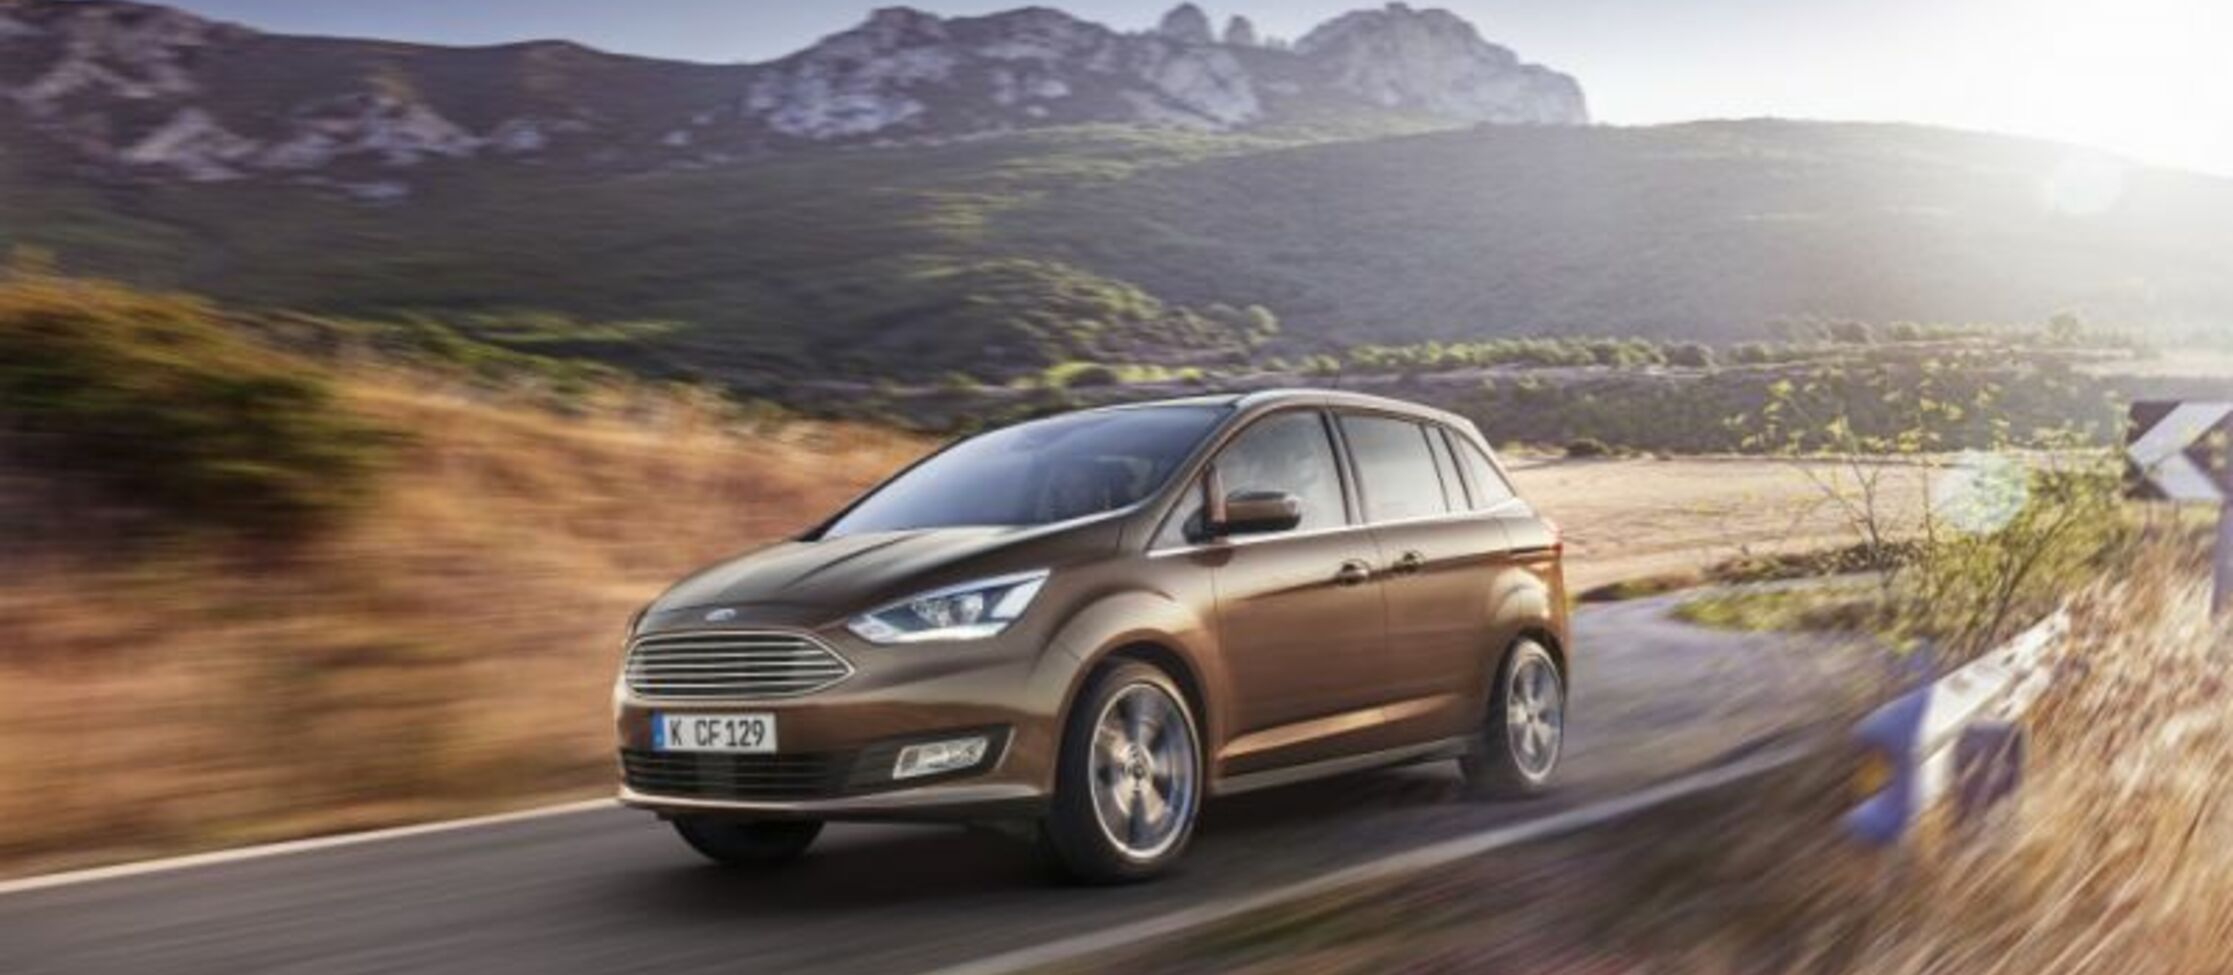 Ford Grand C-MAX (facelift 2015) 1.5 TDCi (120 Hp) 7 Seat 2015, 2016, 2017, 2018, 2019, 2020, 2021